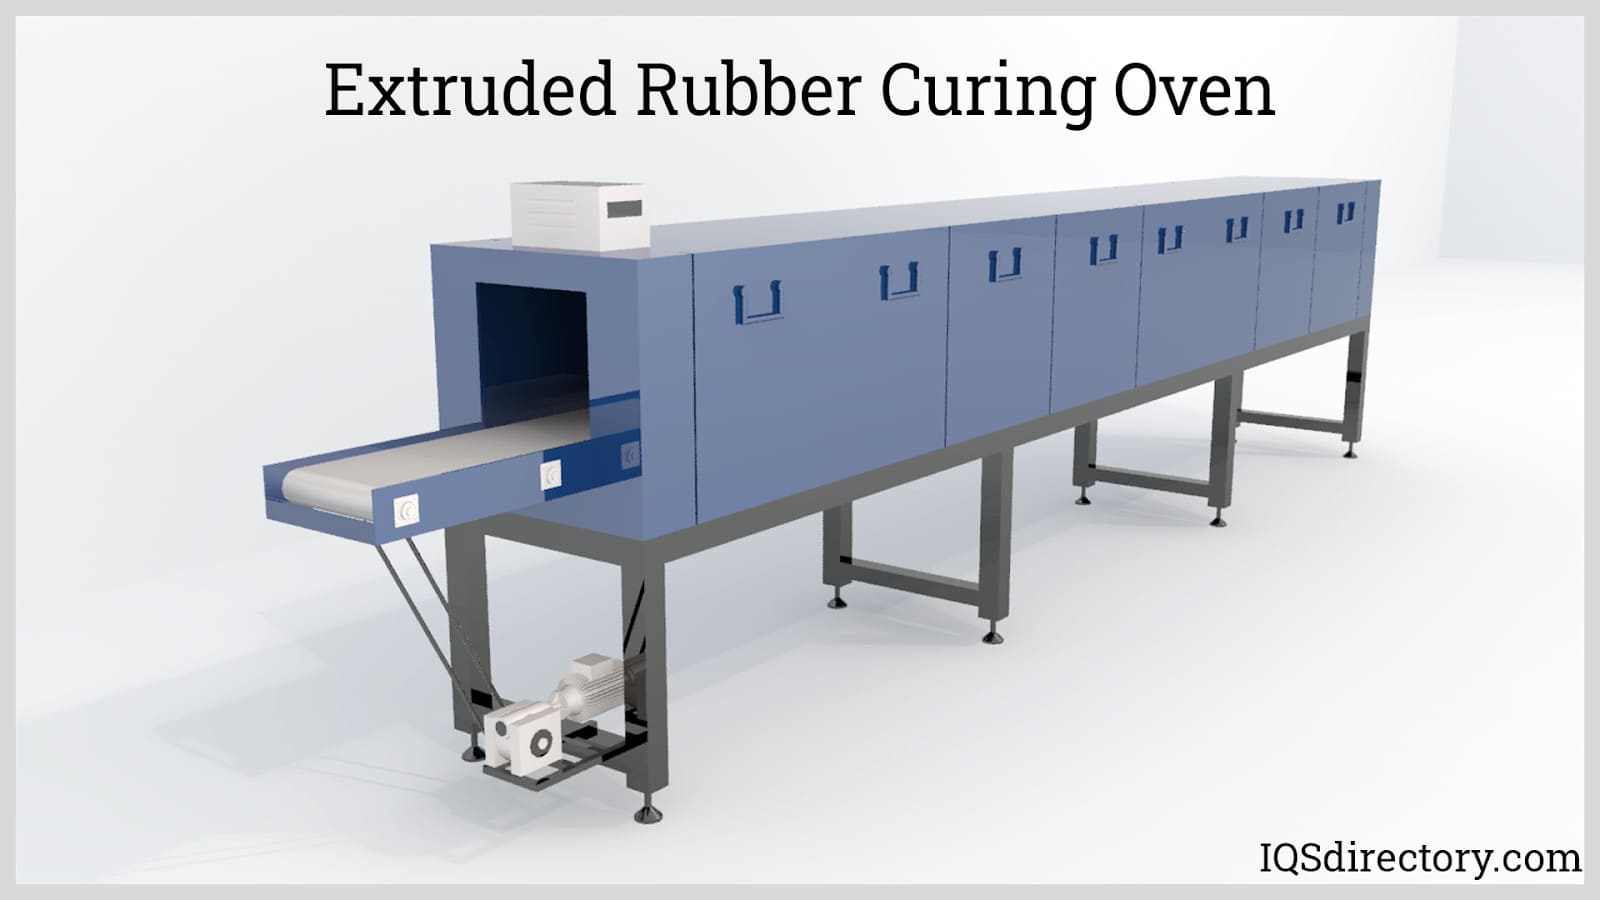 Extruded Rubber Curing Oven